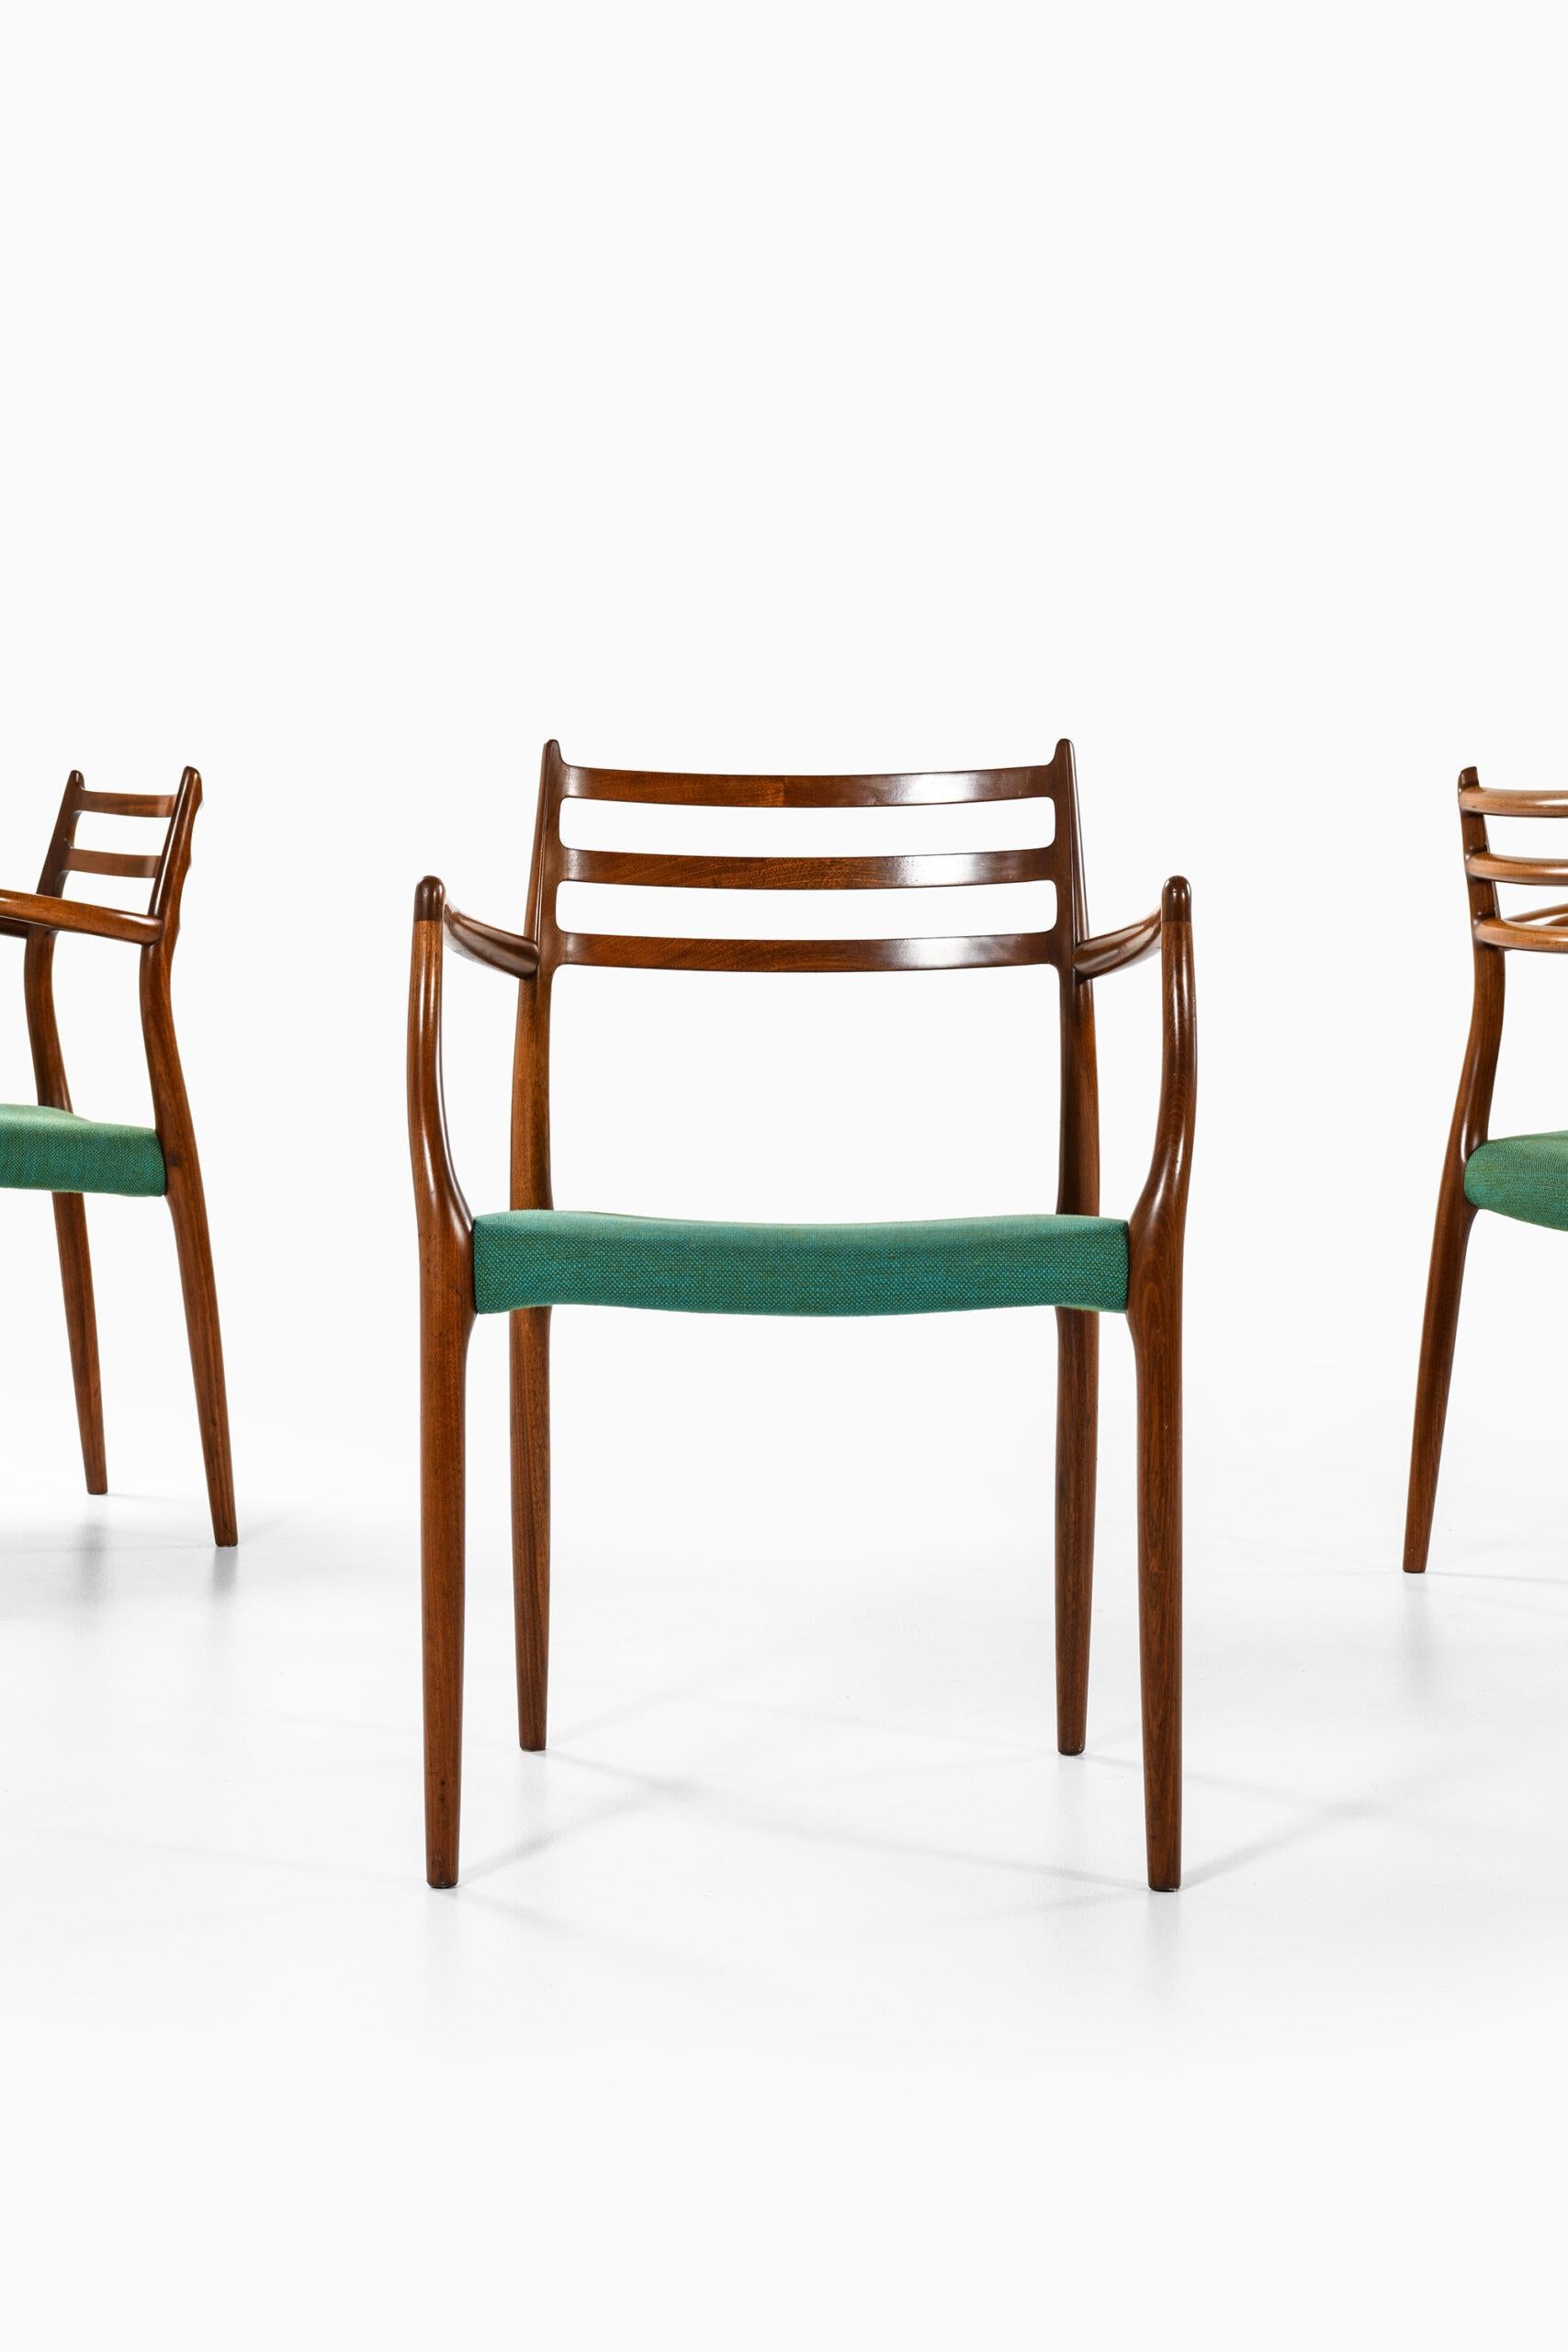 Rare armchairs model 62 designed by Niels Otto Møller. Produced by J.L Møllers Møbelfabrik in Denmark. Price is listed / item.